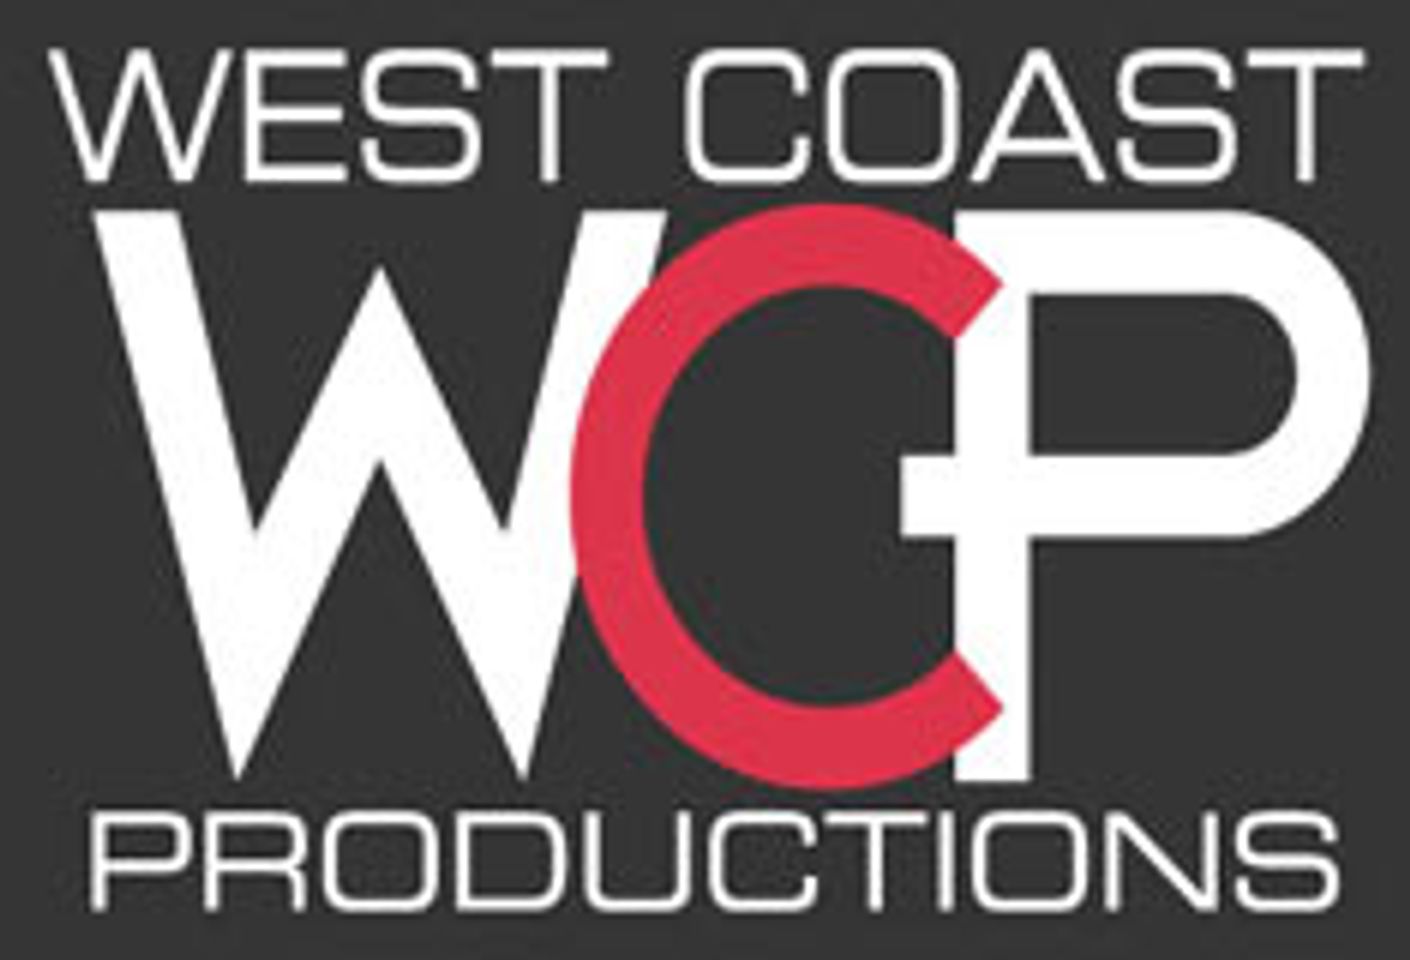 Domineko Performs, Directs, and Scores New Series for West Coast